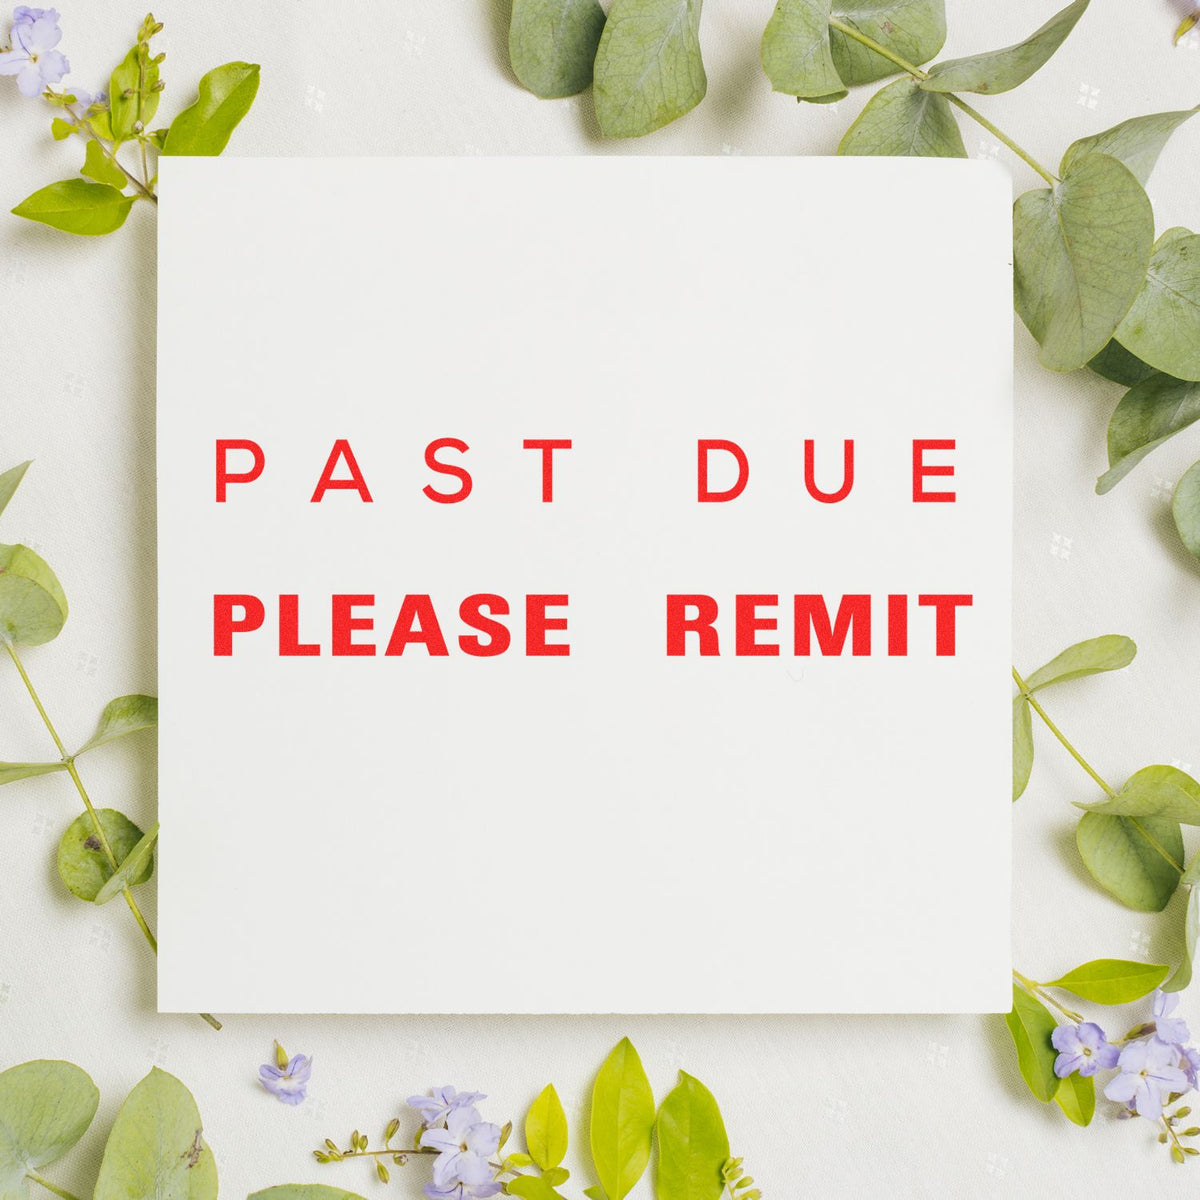 Past Due Please Remit Rubber Stamp In Use Photo